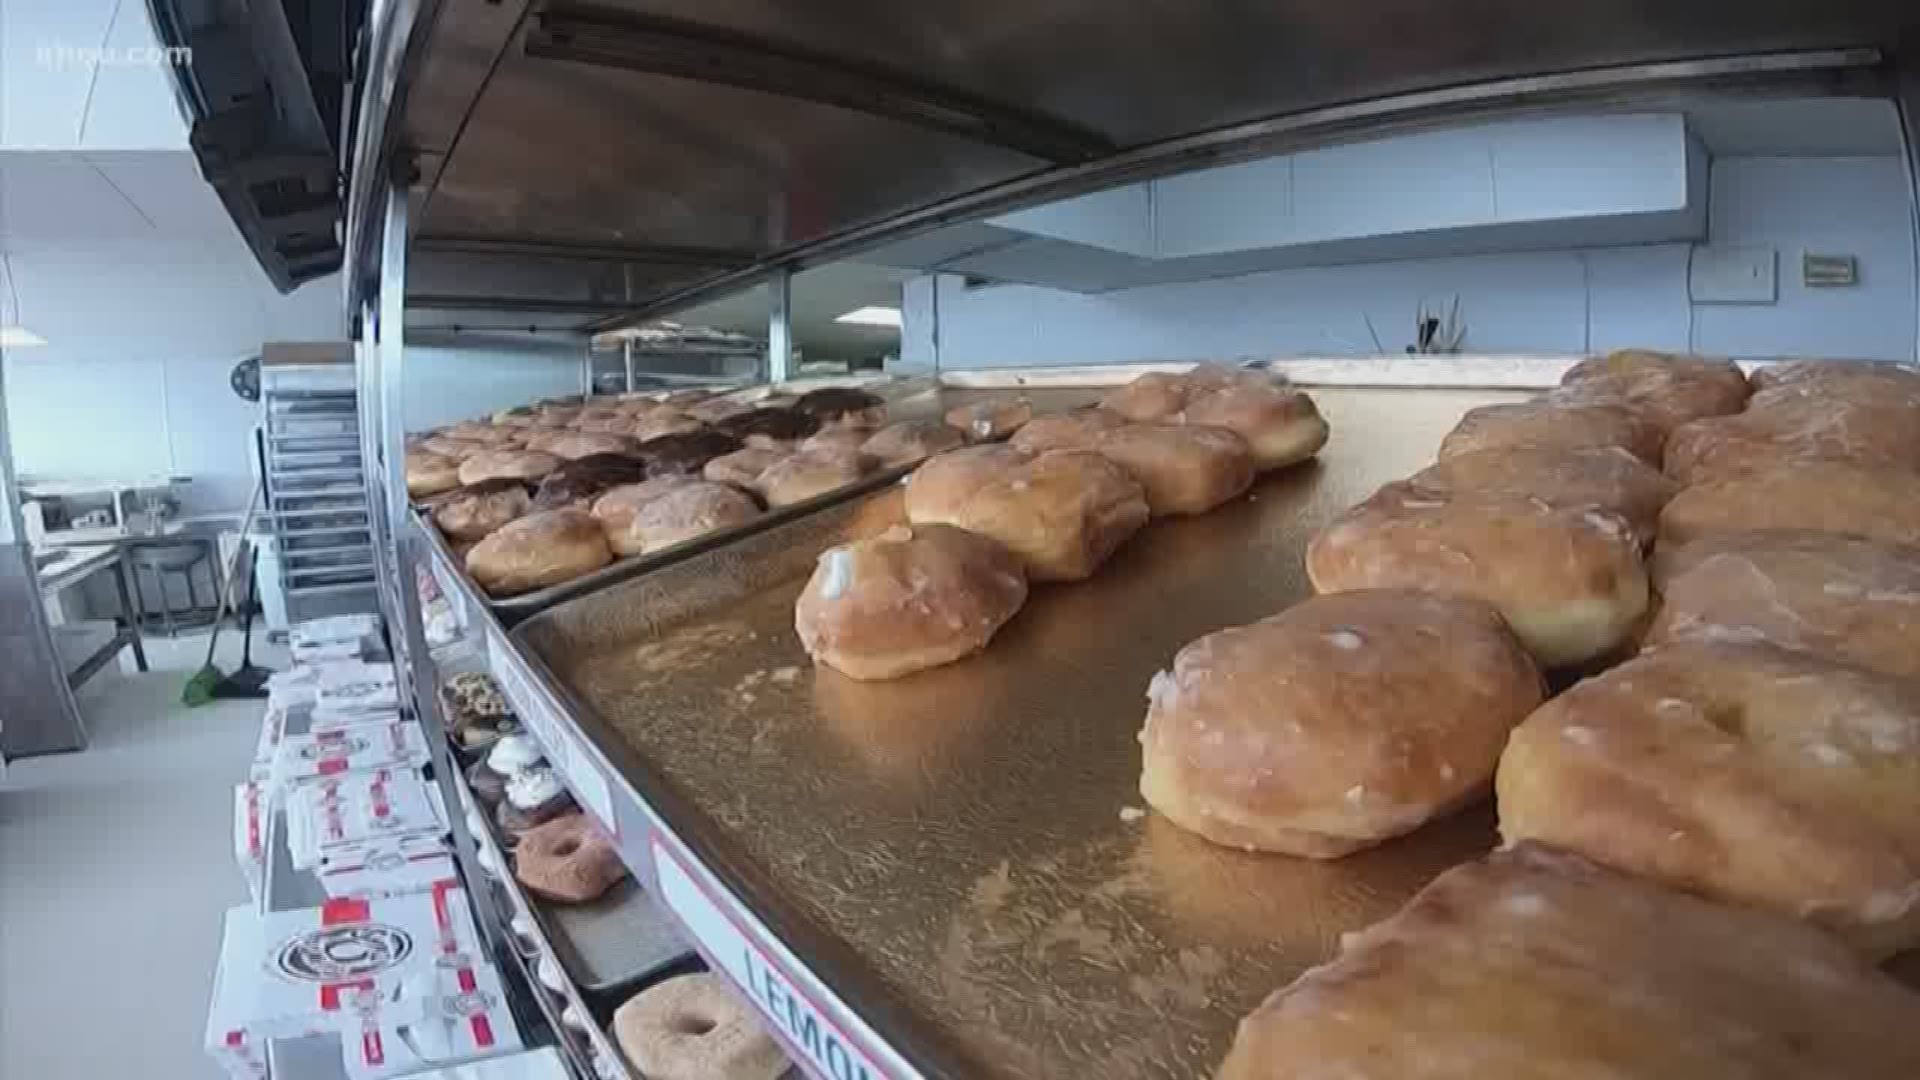 Friday is National Donut Day and some donut shops are celebrating with freebies and discounts.